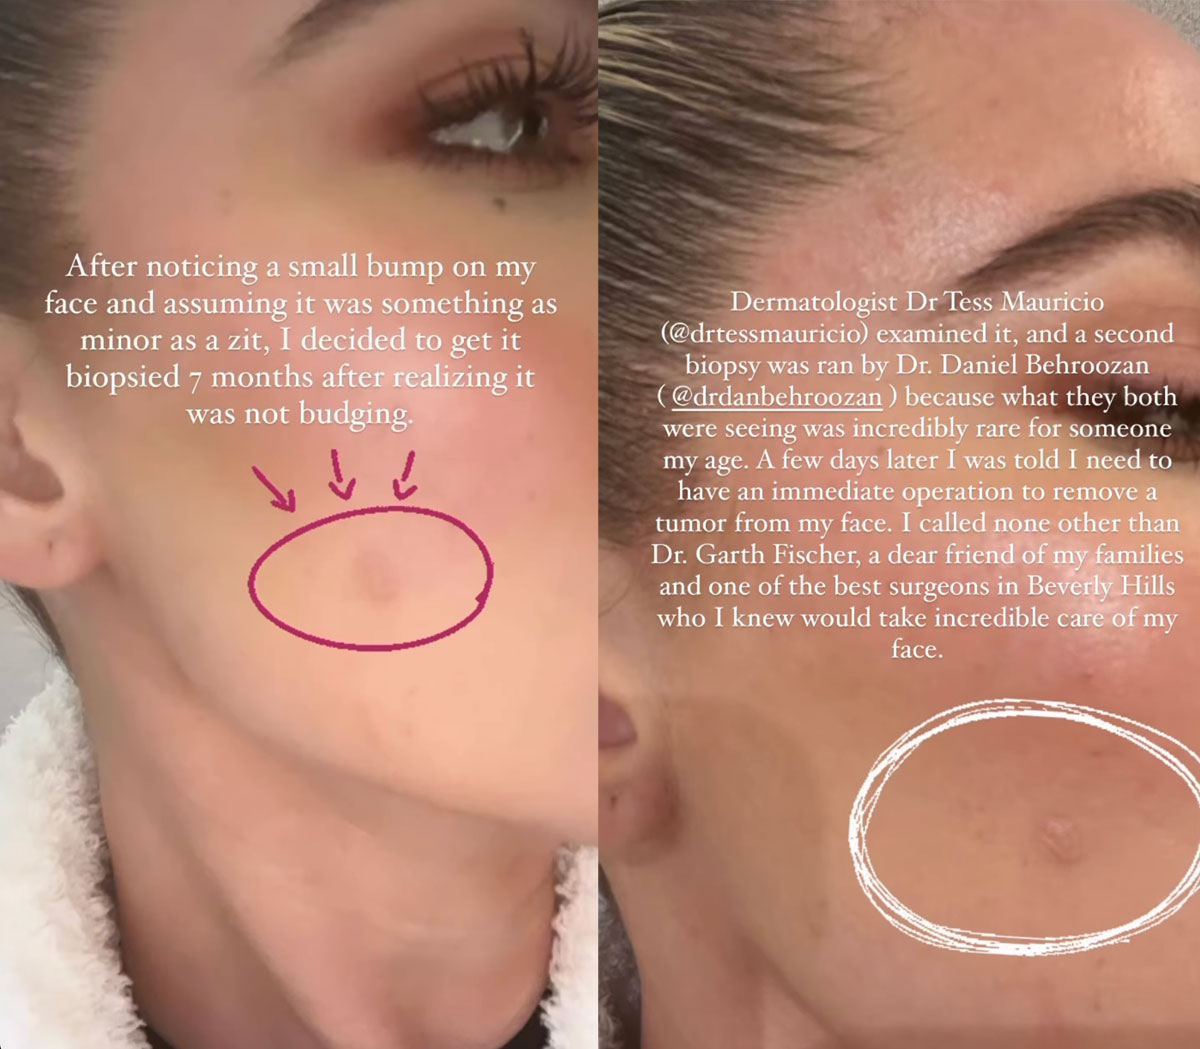 Khloé Kardashian Details Getting A TUMOR Removed From Her Face!!